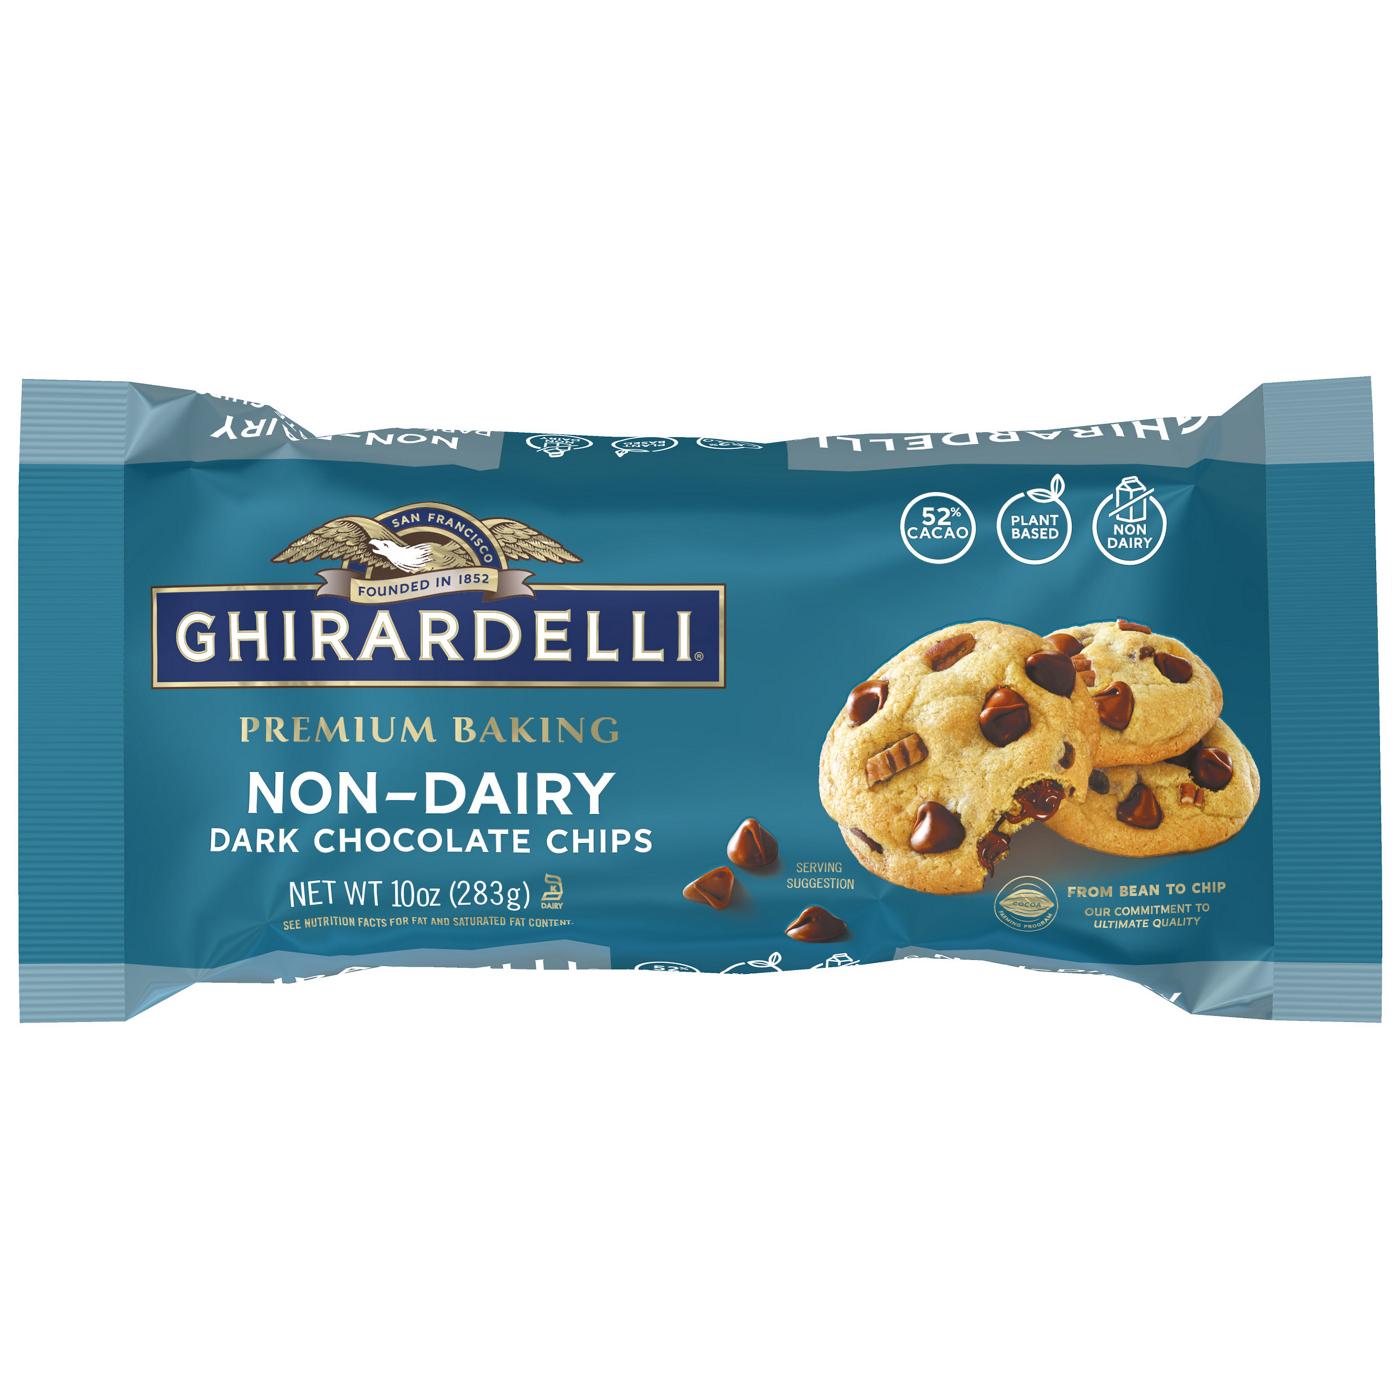 Ghirardelli Non-Dairy Dark Chocolate Chips with 52% Cacao; image 1 of 2